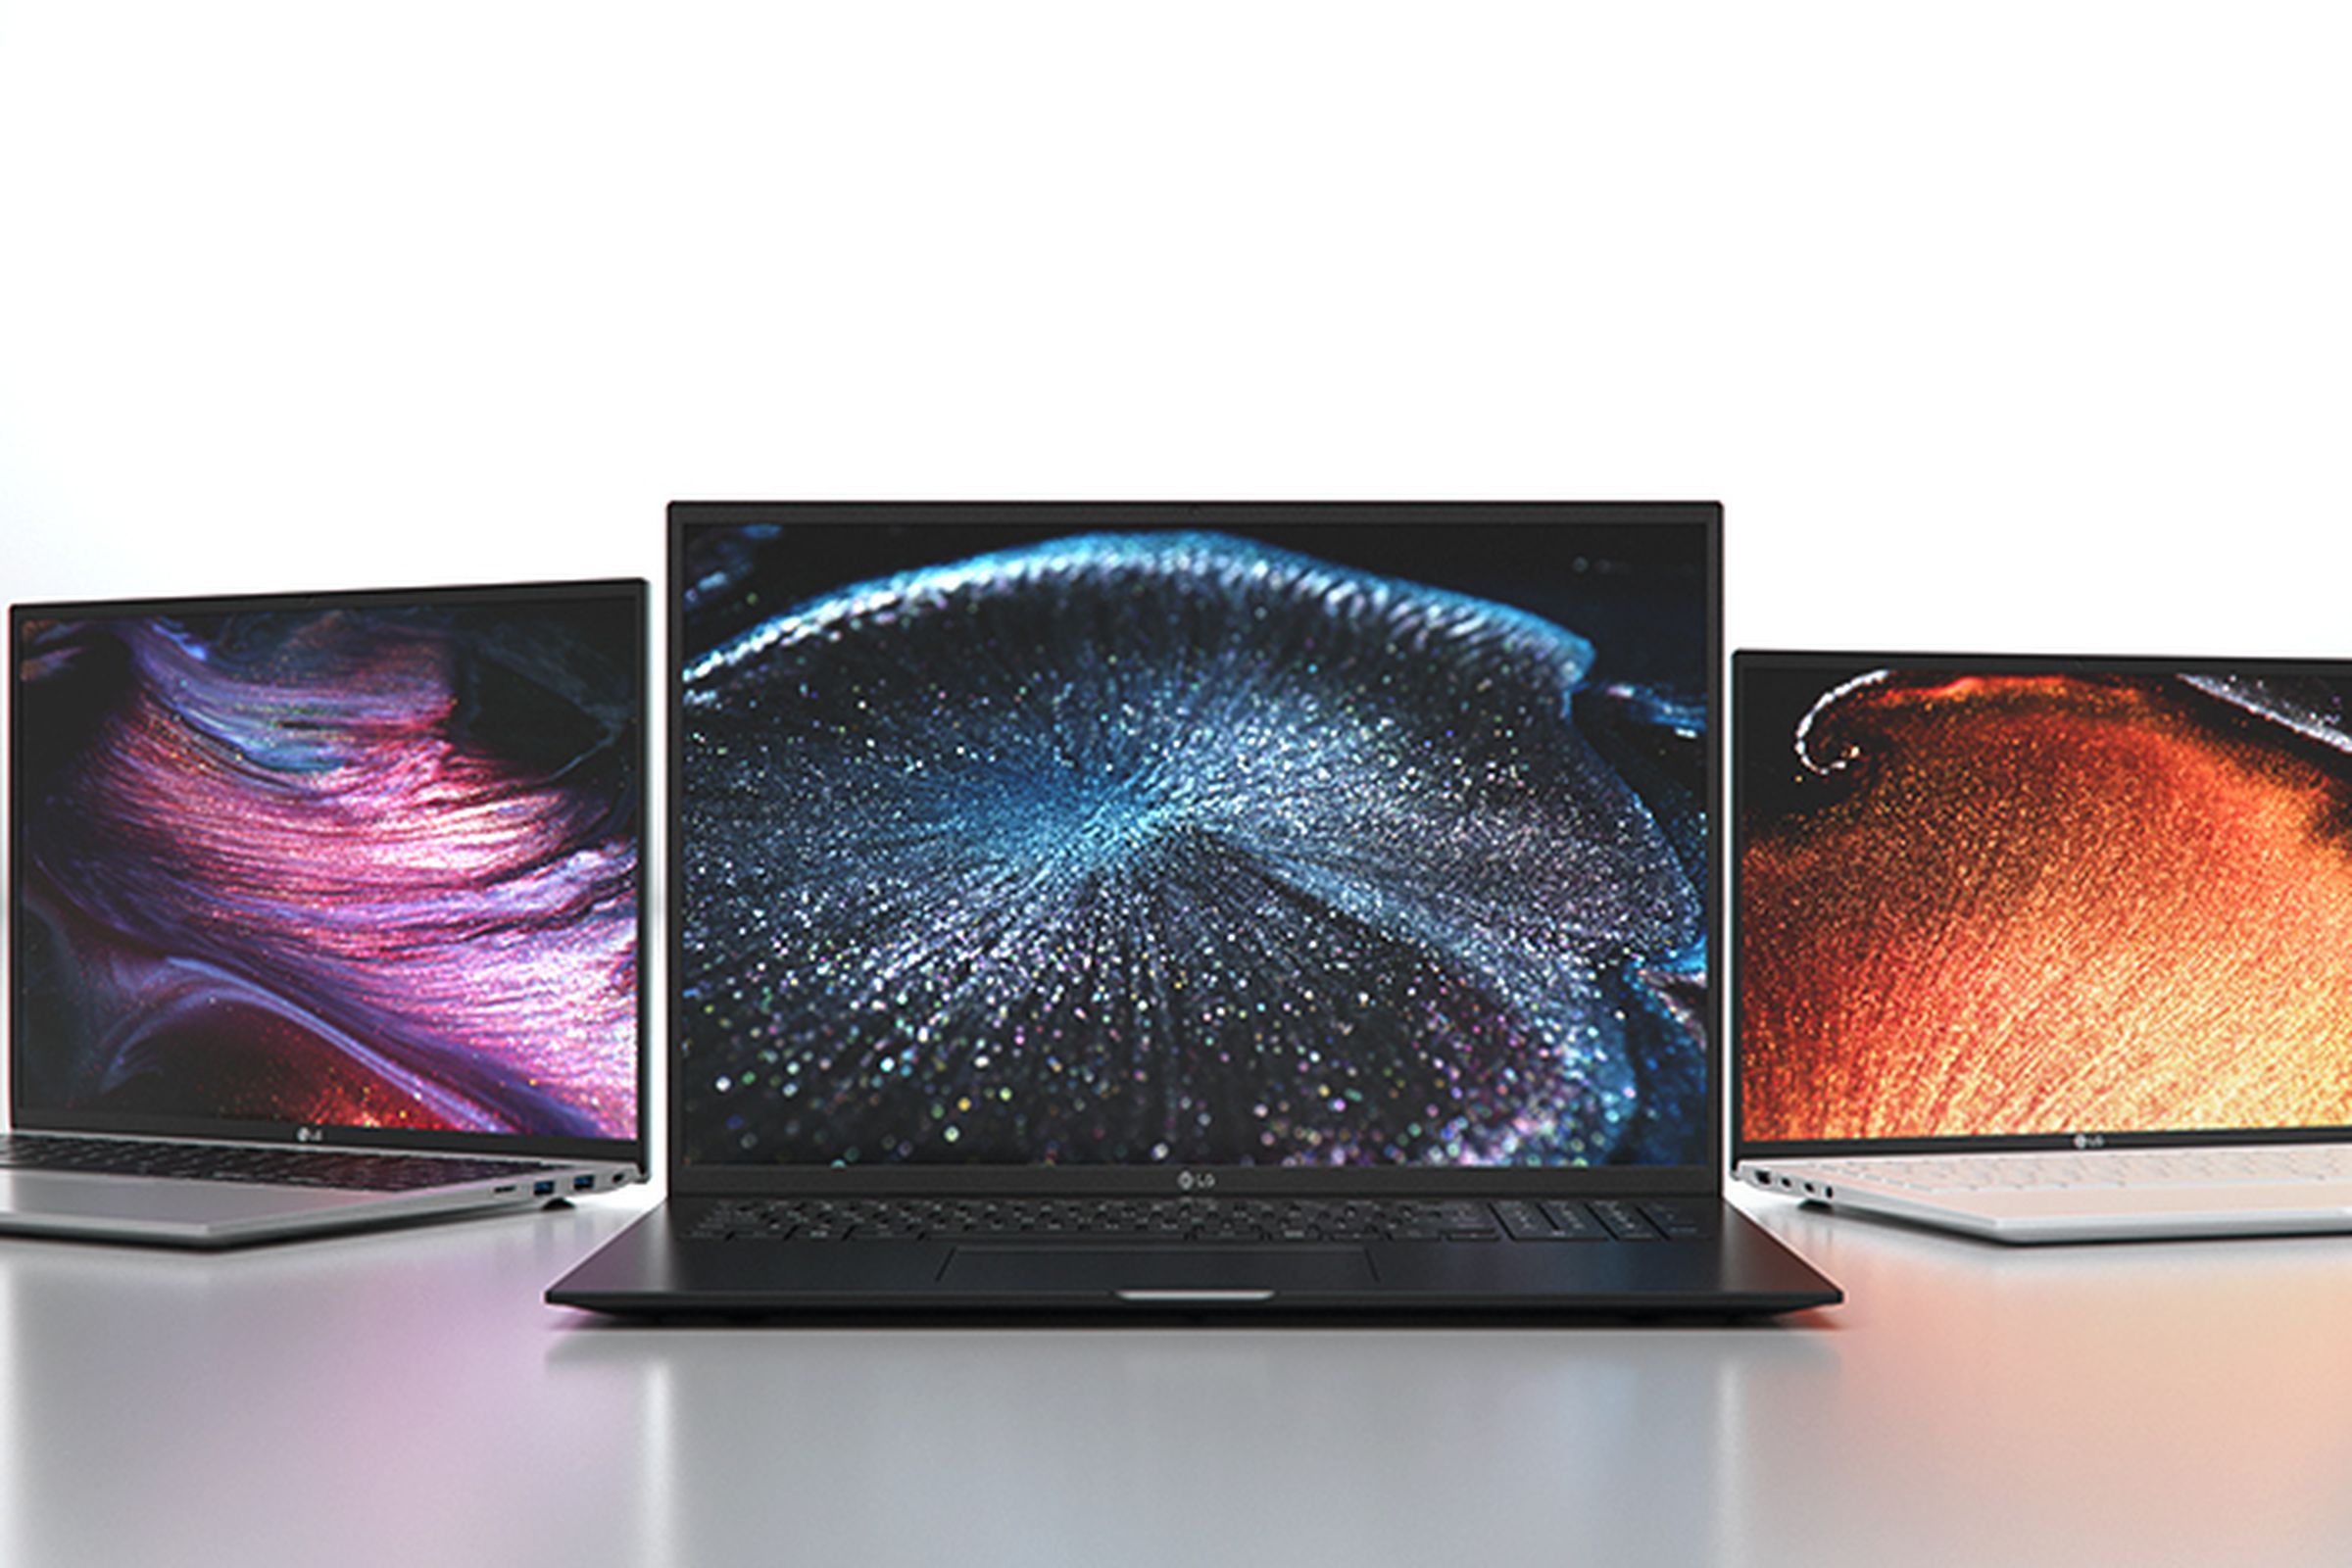 Three LG Gram laptops open, facing the camera in a convex semicircle. Each screen displays a space image.